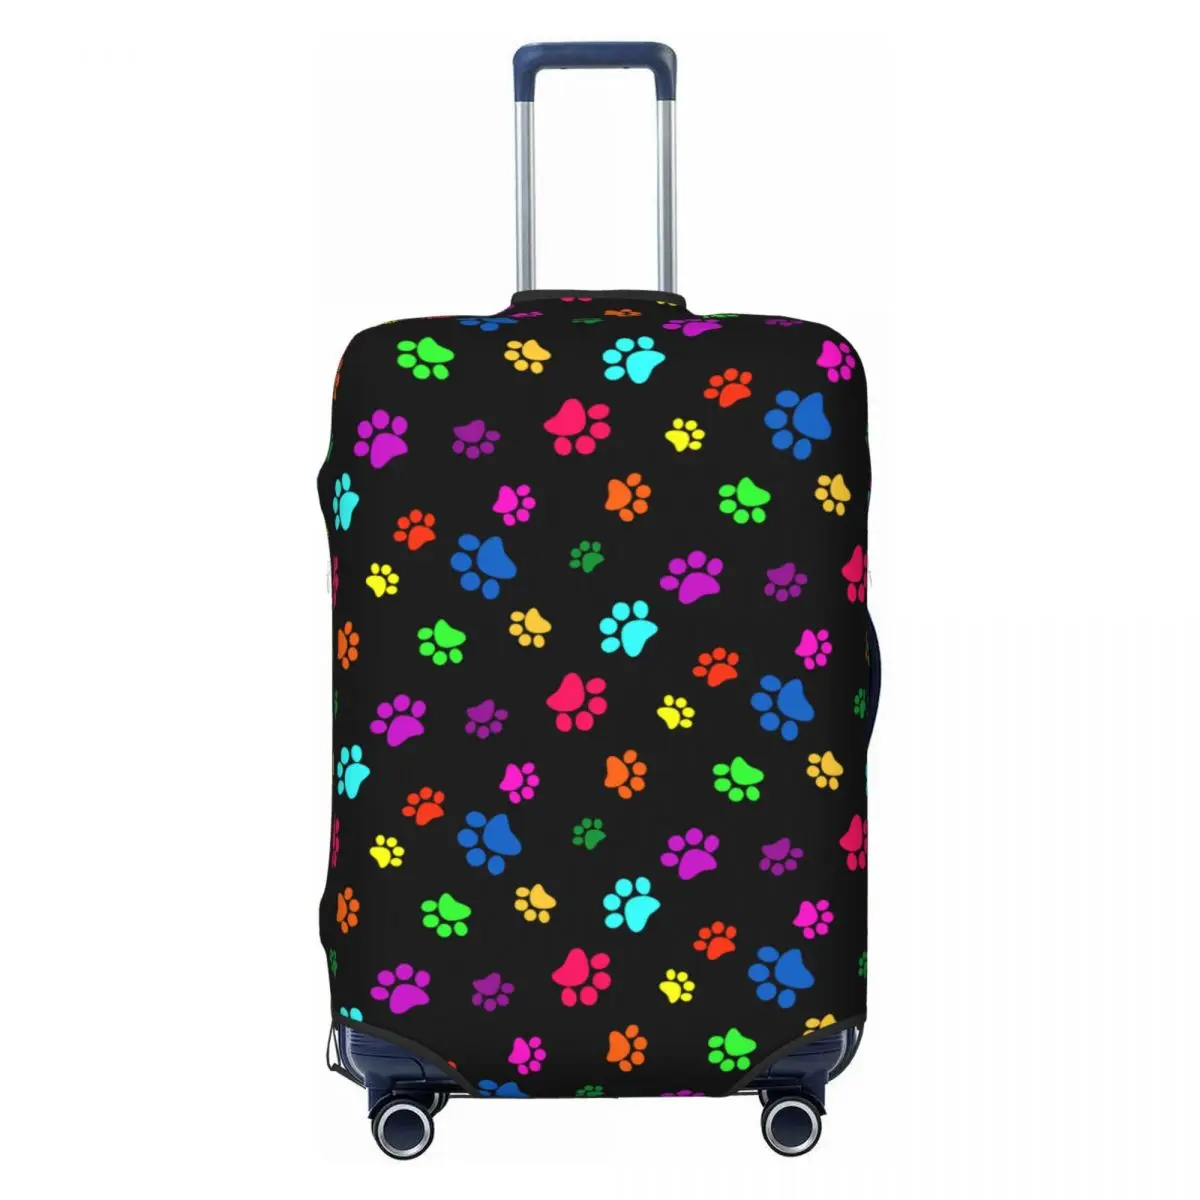 

Custom Colorful Animal Footprint Dog Paw Prints Luggage Cover Protector Funny Travel Suitcase Covers for 18-32 Inch